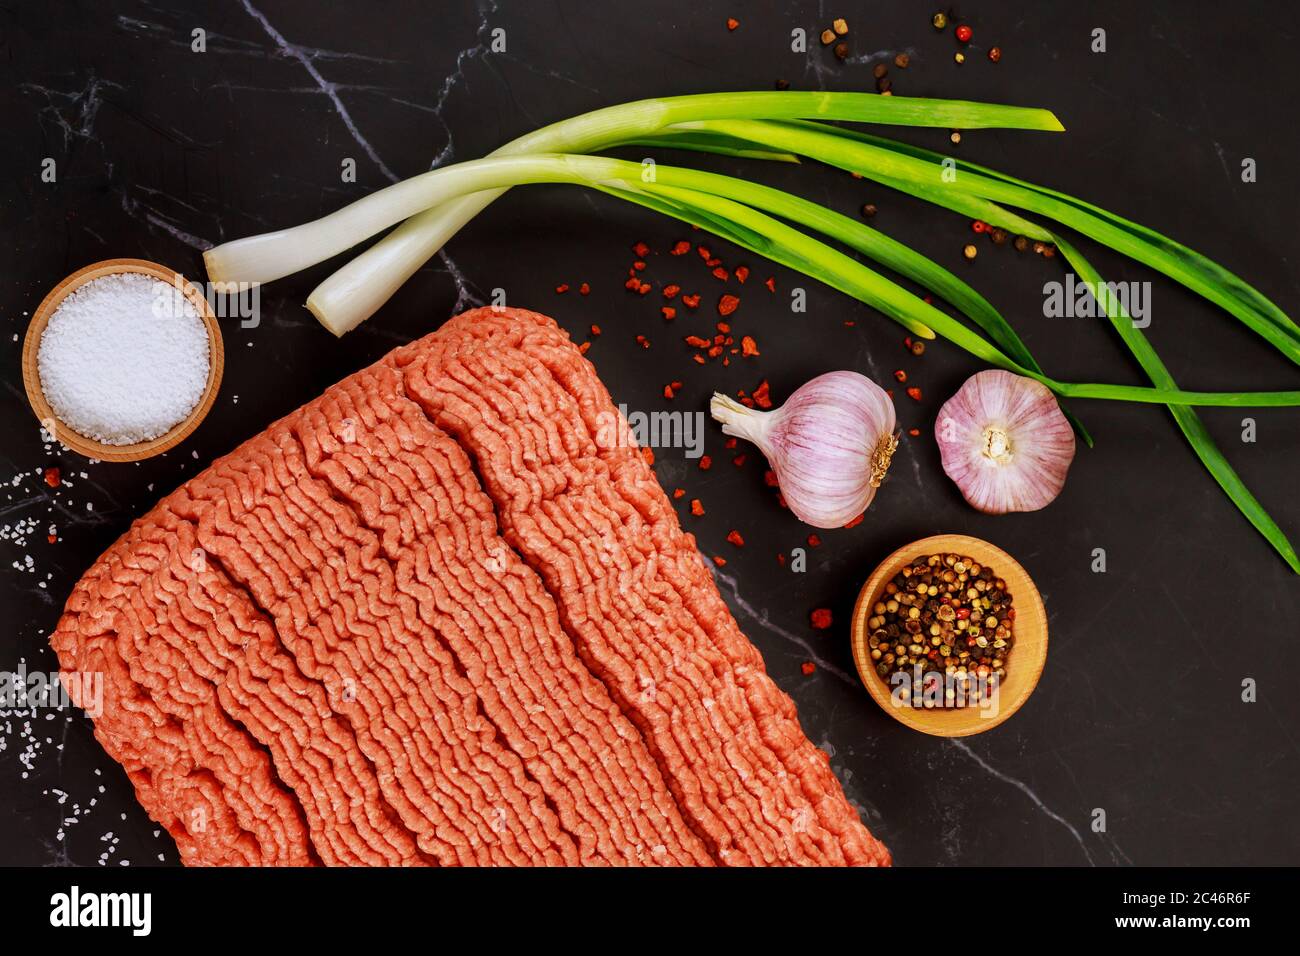 Uncooked ground beef with garlic and green onion on black background. Stock Photo